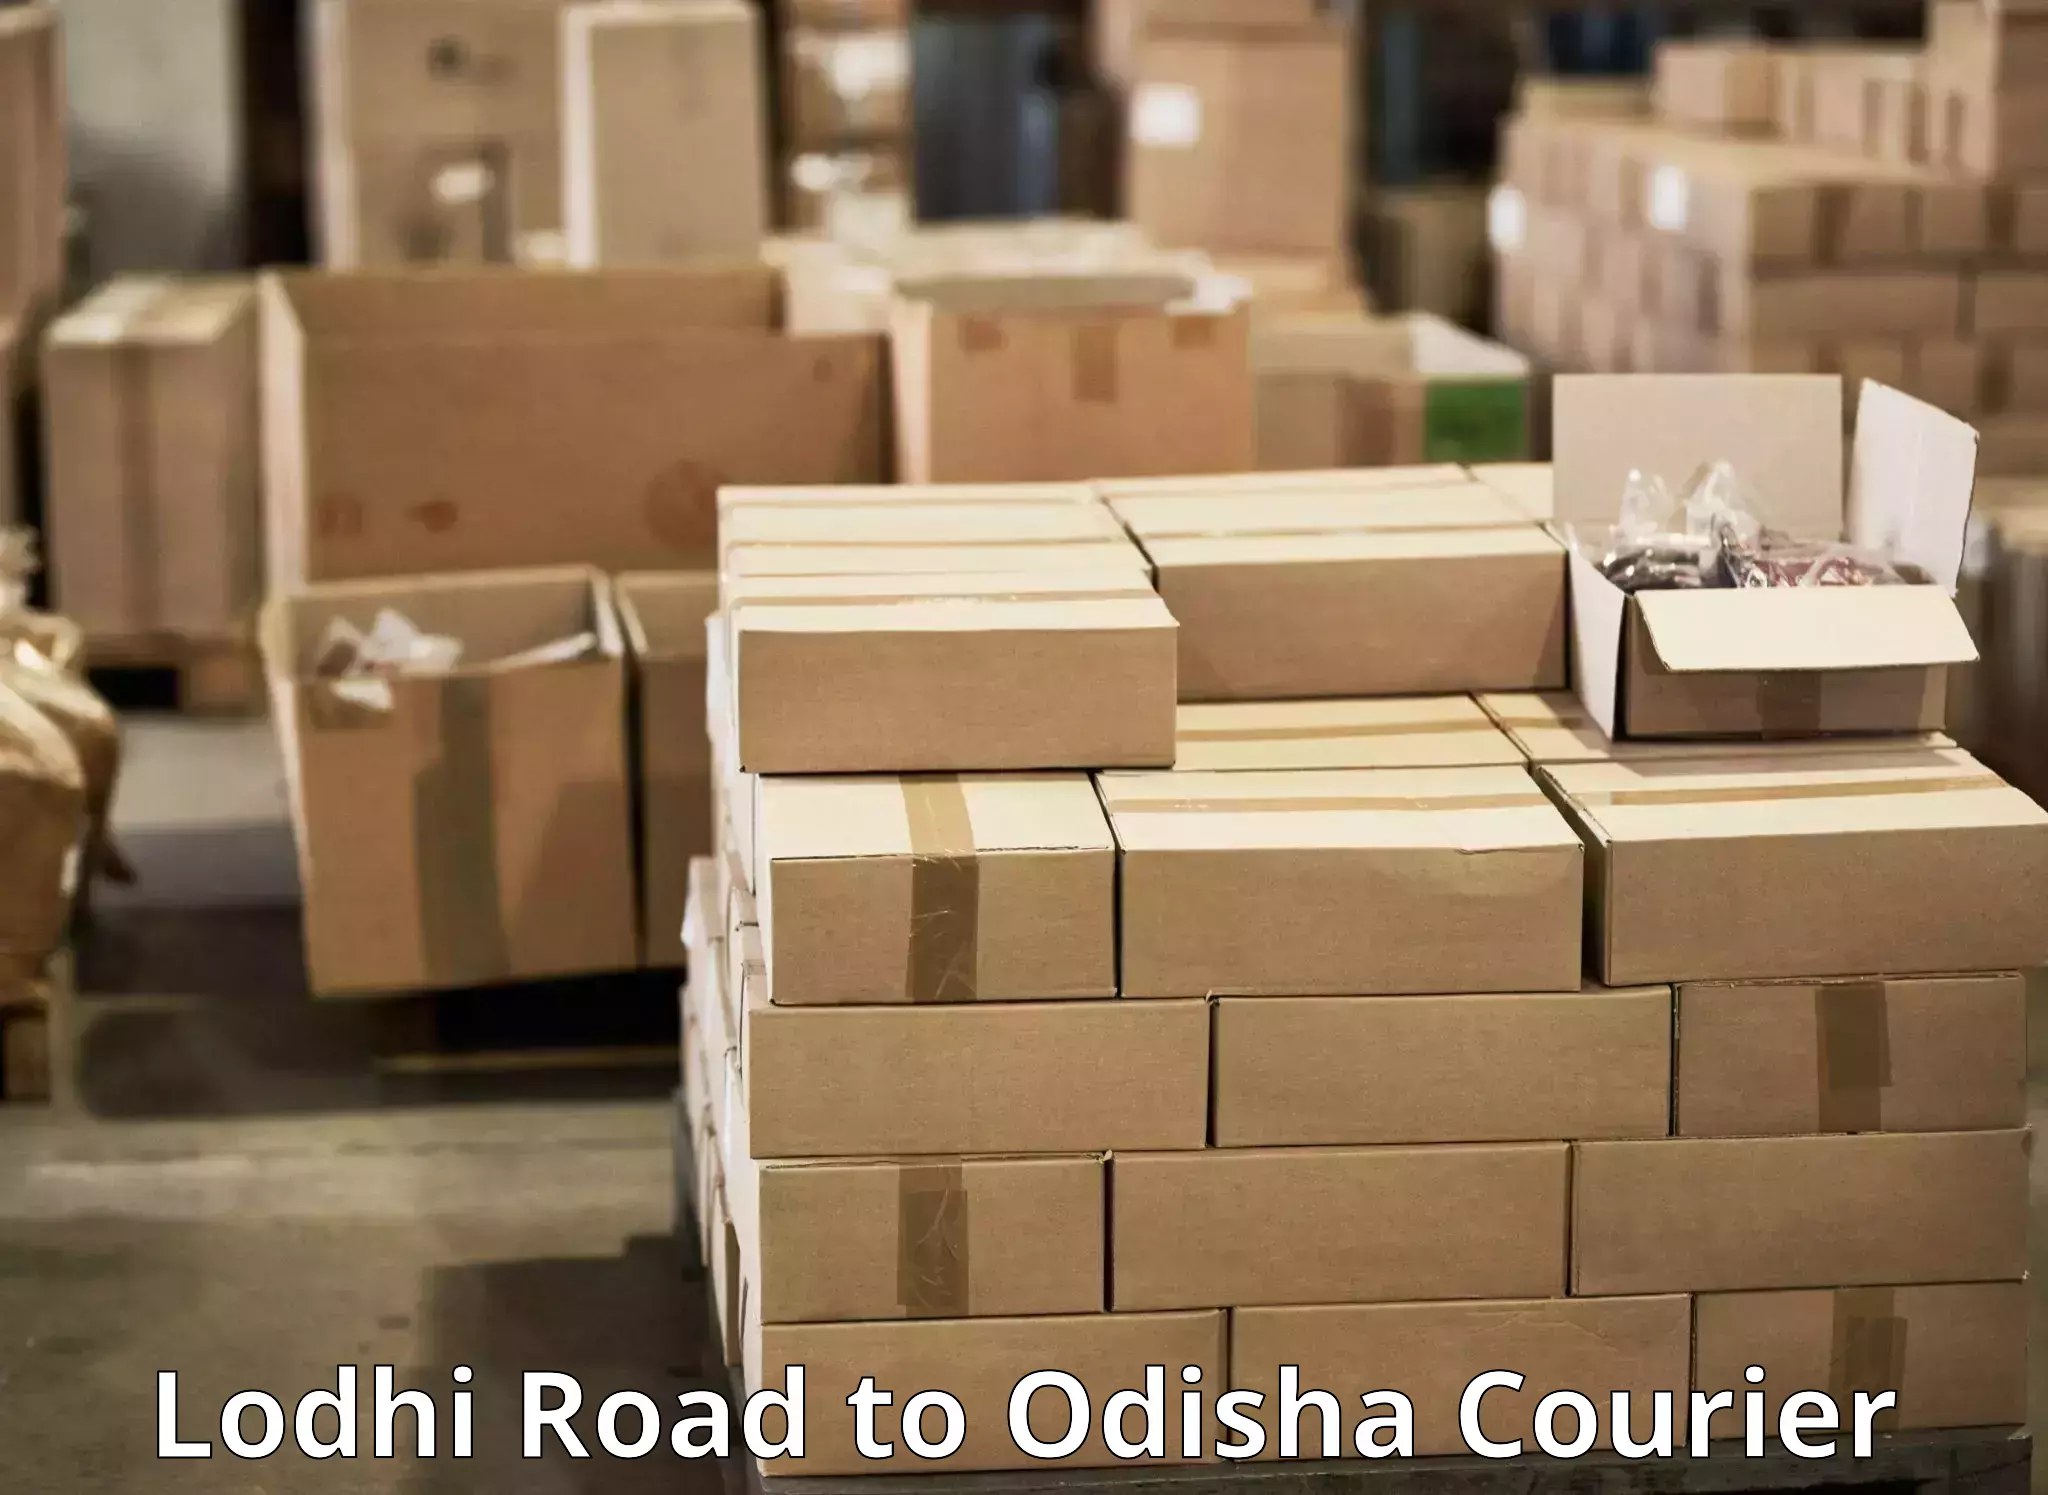 Subscription-based courier Lodhi Road to Daspalla